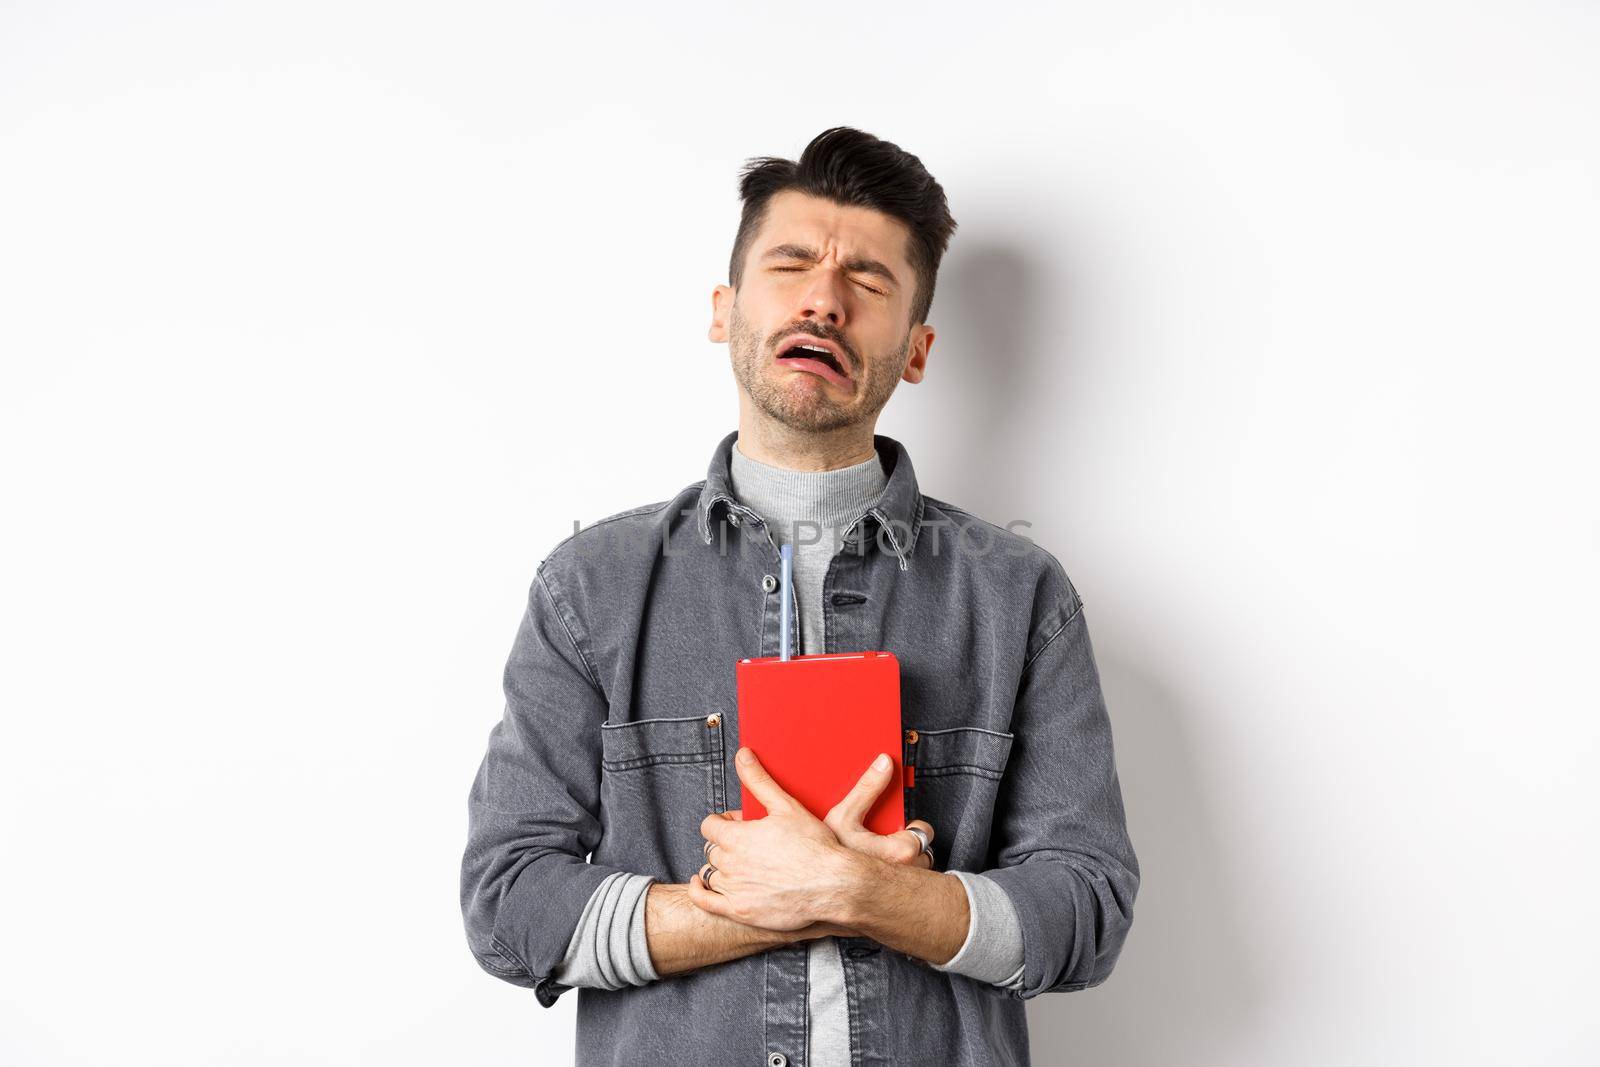 Sad cryig man holding red diary and sobbing, miserable guy carry journal with him, standing against white background.